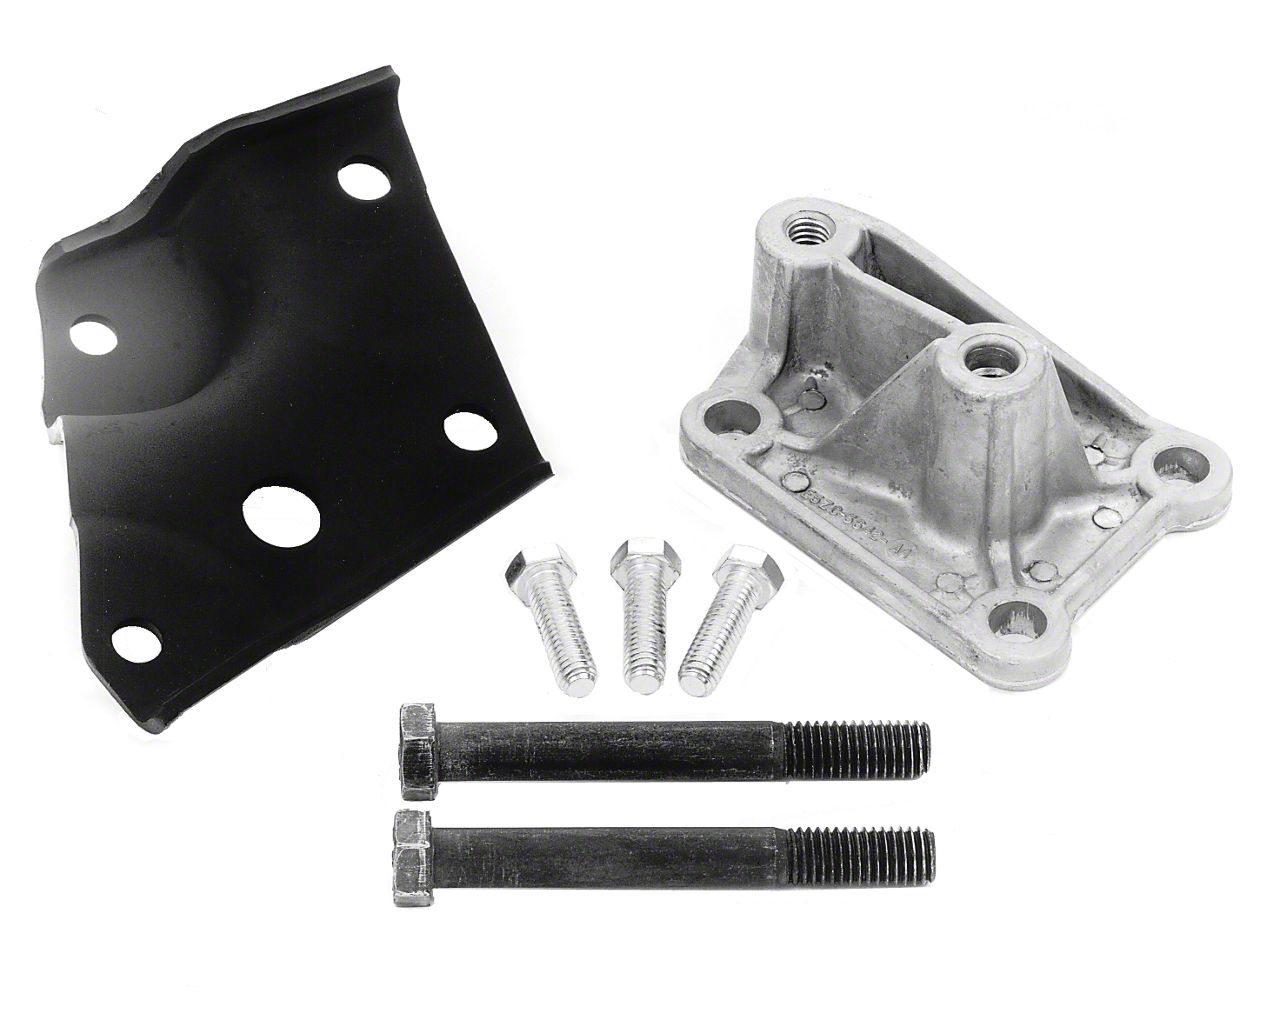 Ford racing ac delete kit instructions #2